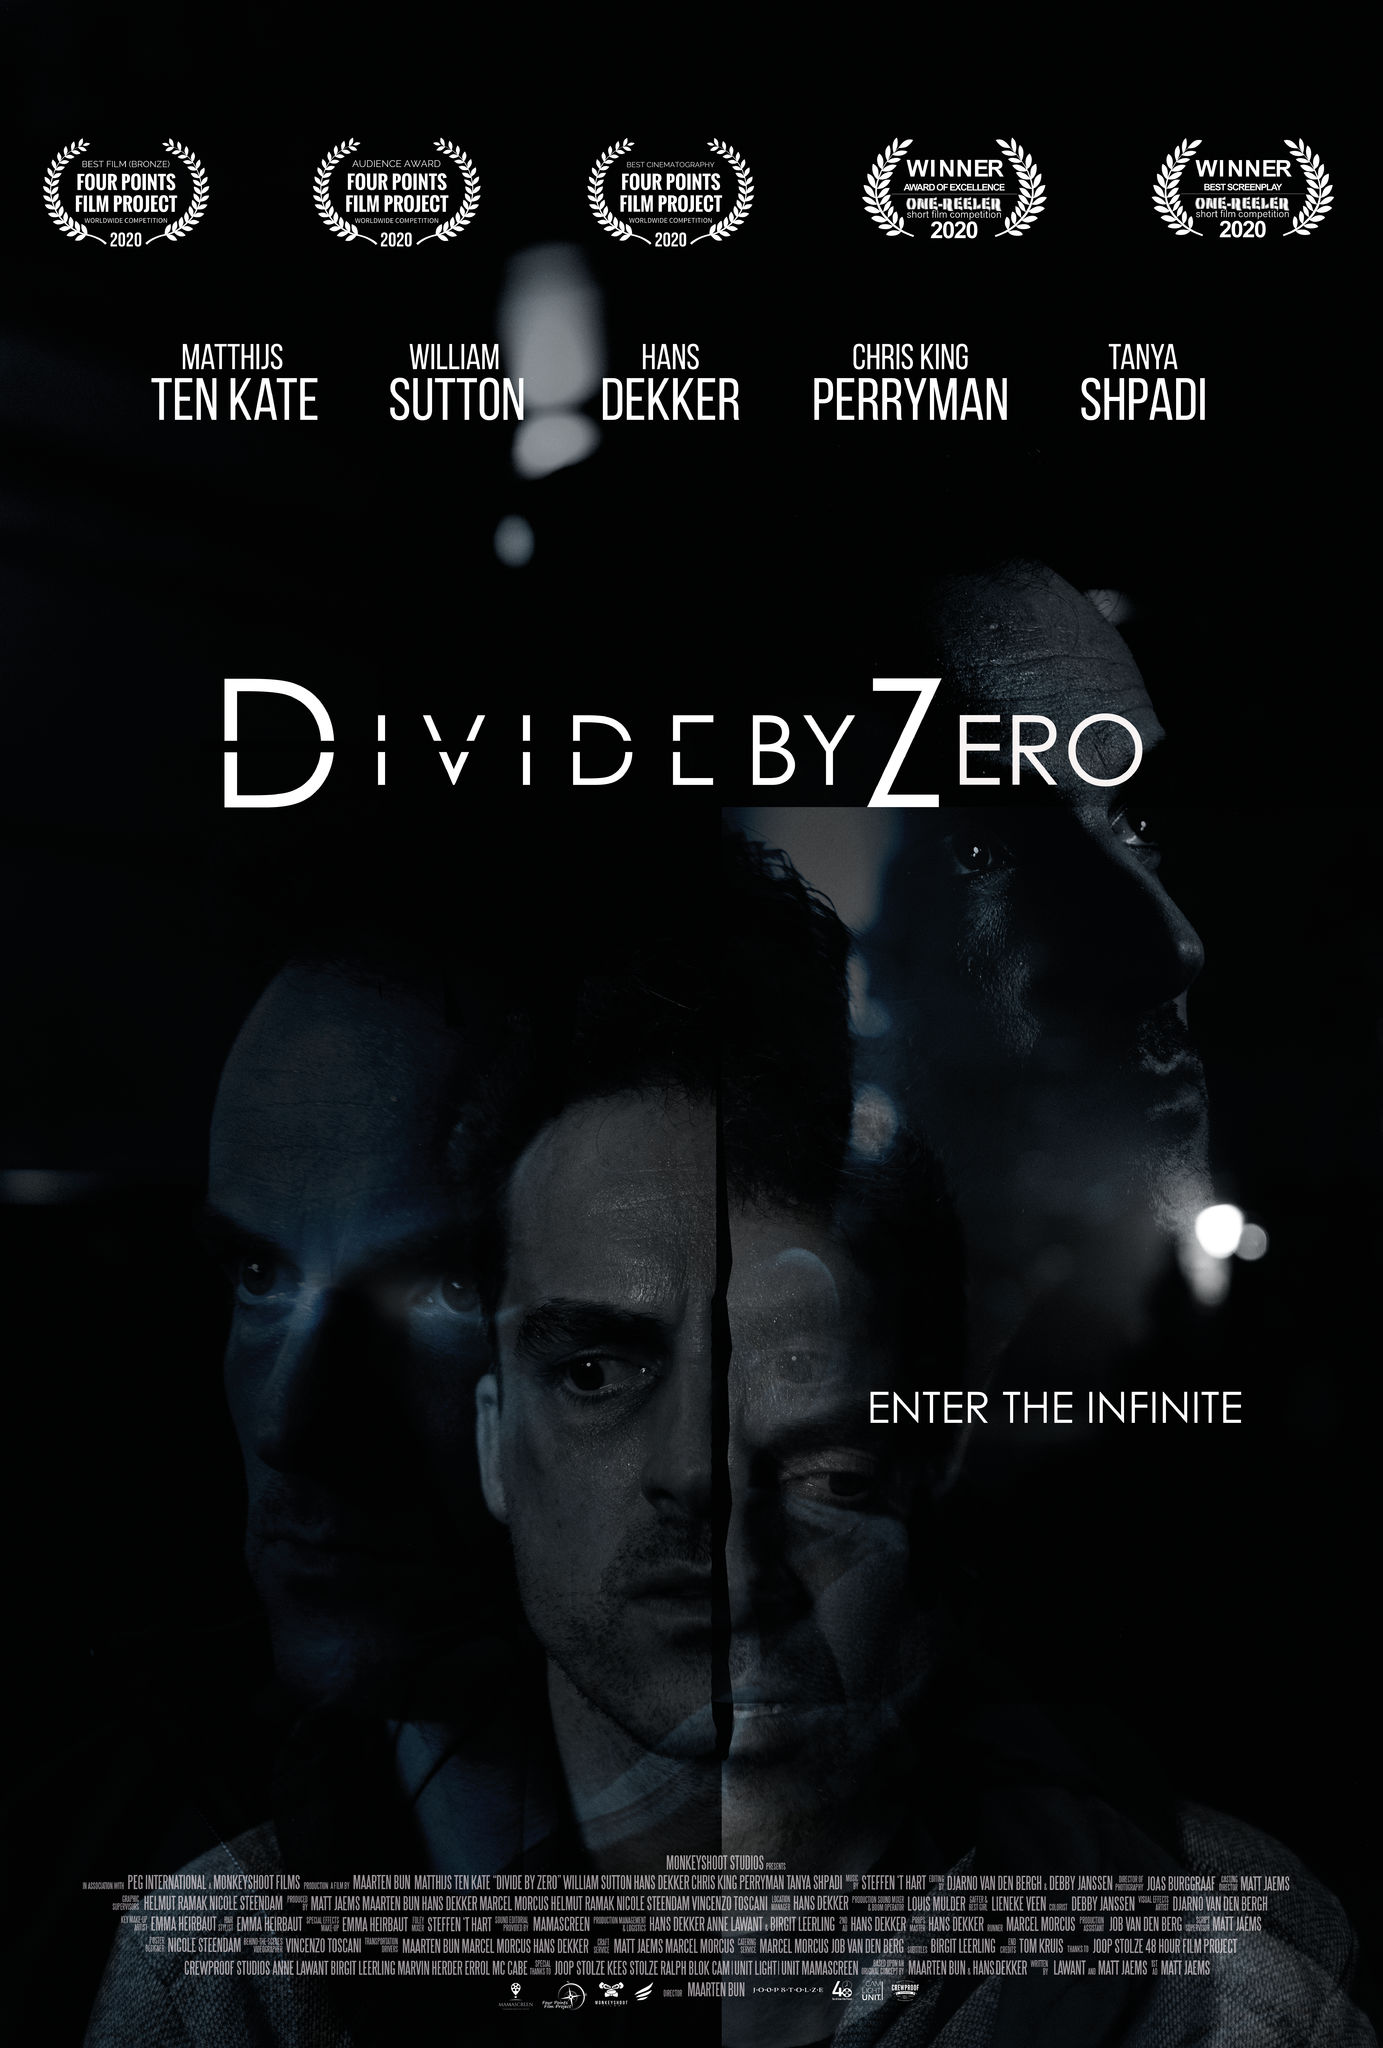 DIVIDE BY ZERO